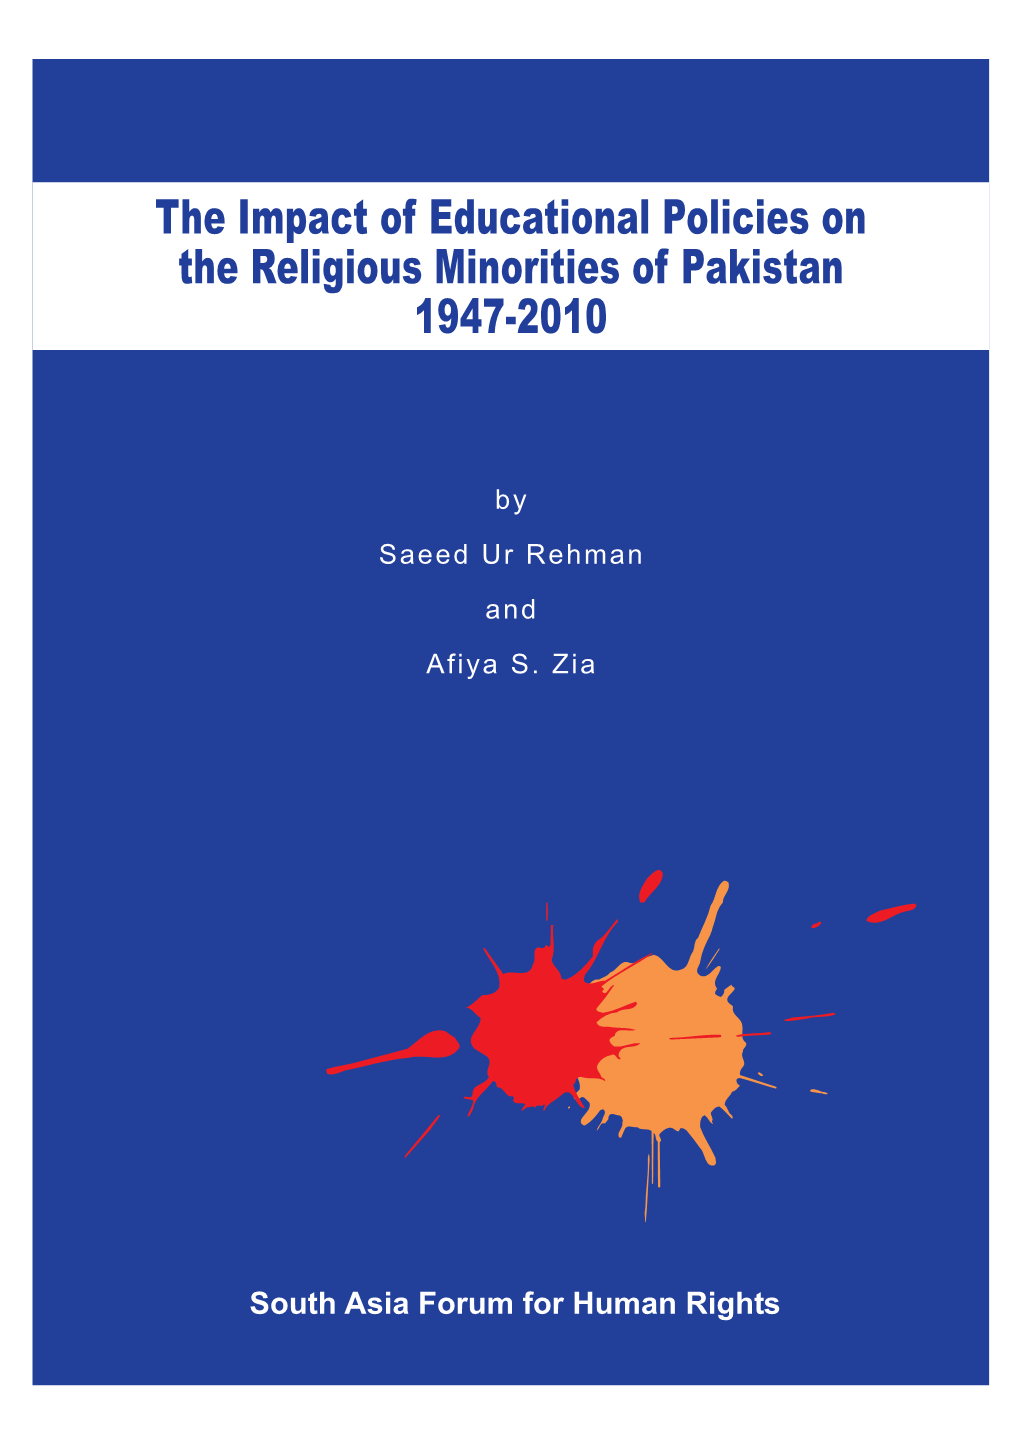 The Impact of Educational Policies on the Religious Minorities of Pakistan 1947-2010